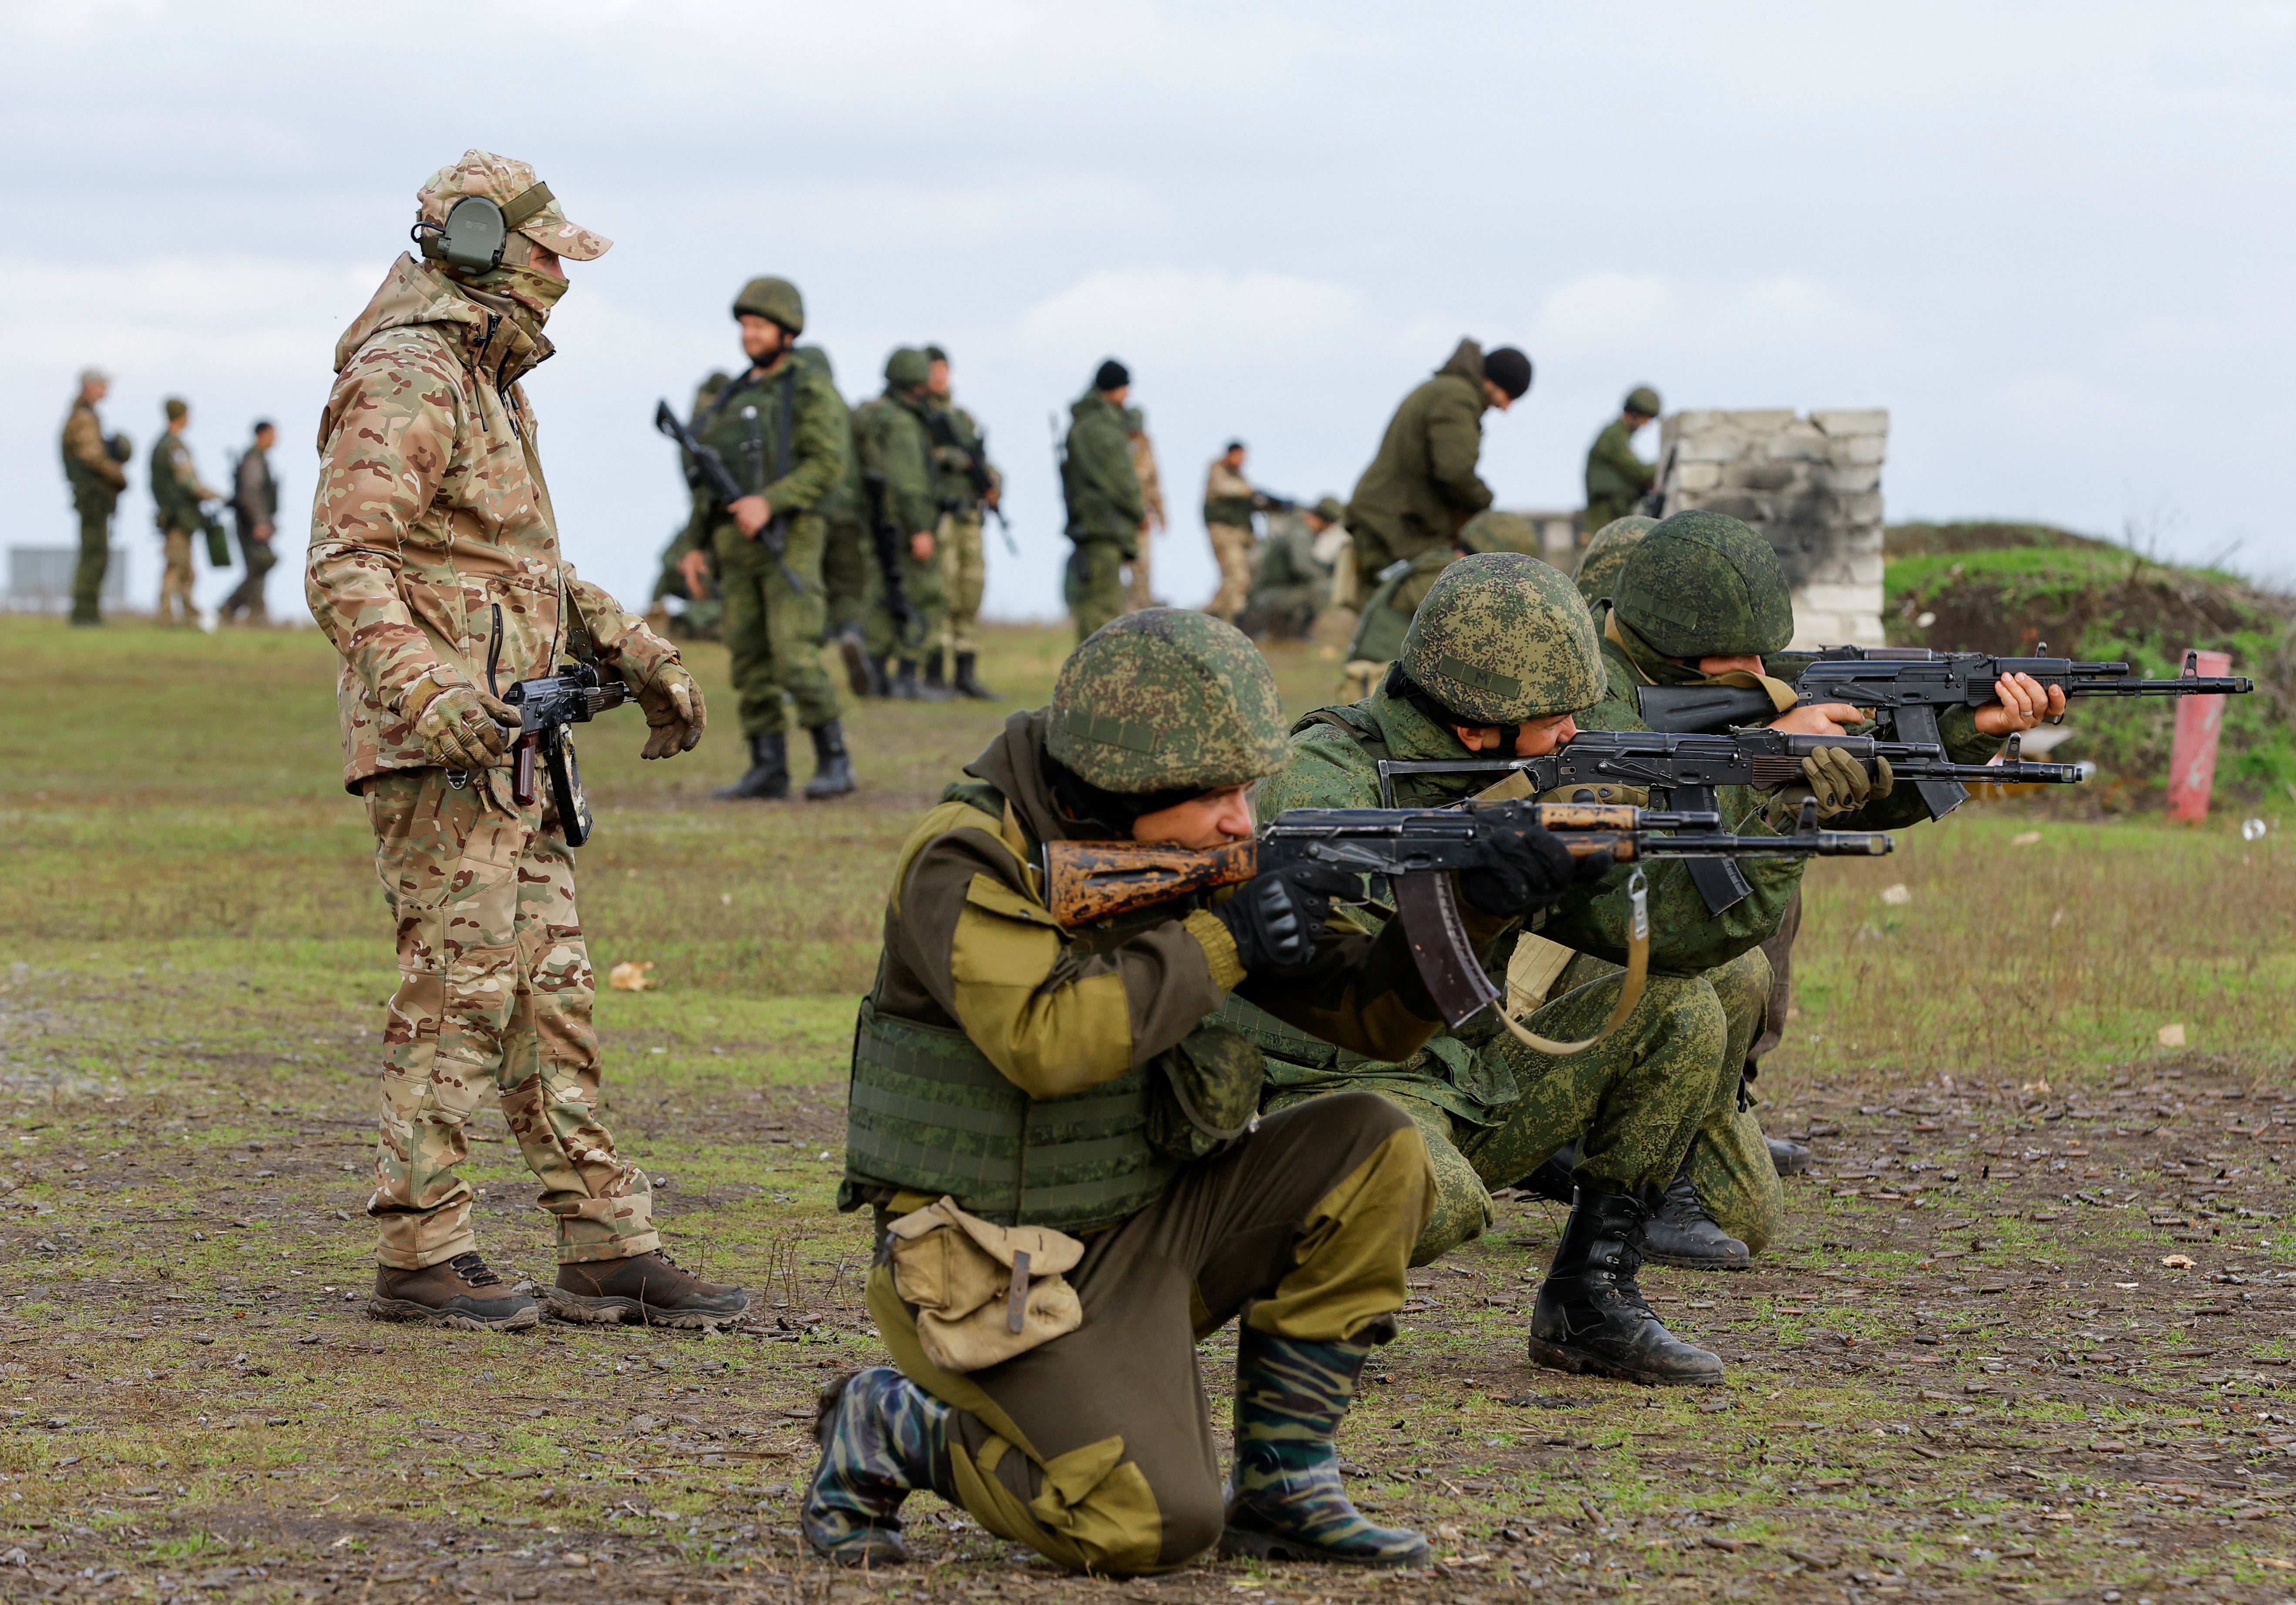 Russian parliament backs recruiting criminals for regular army for Ukraine conflict